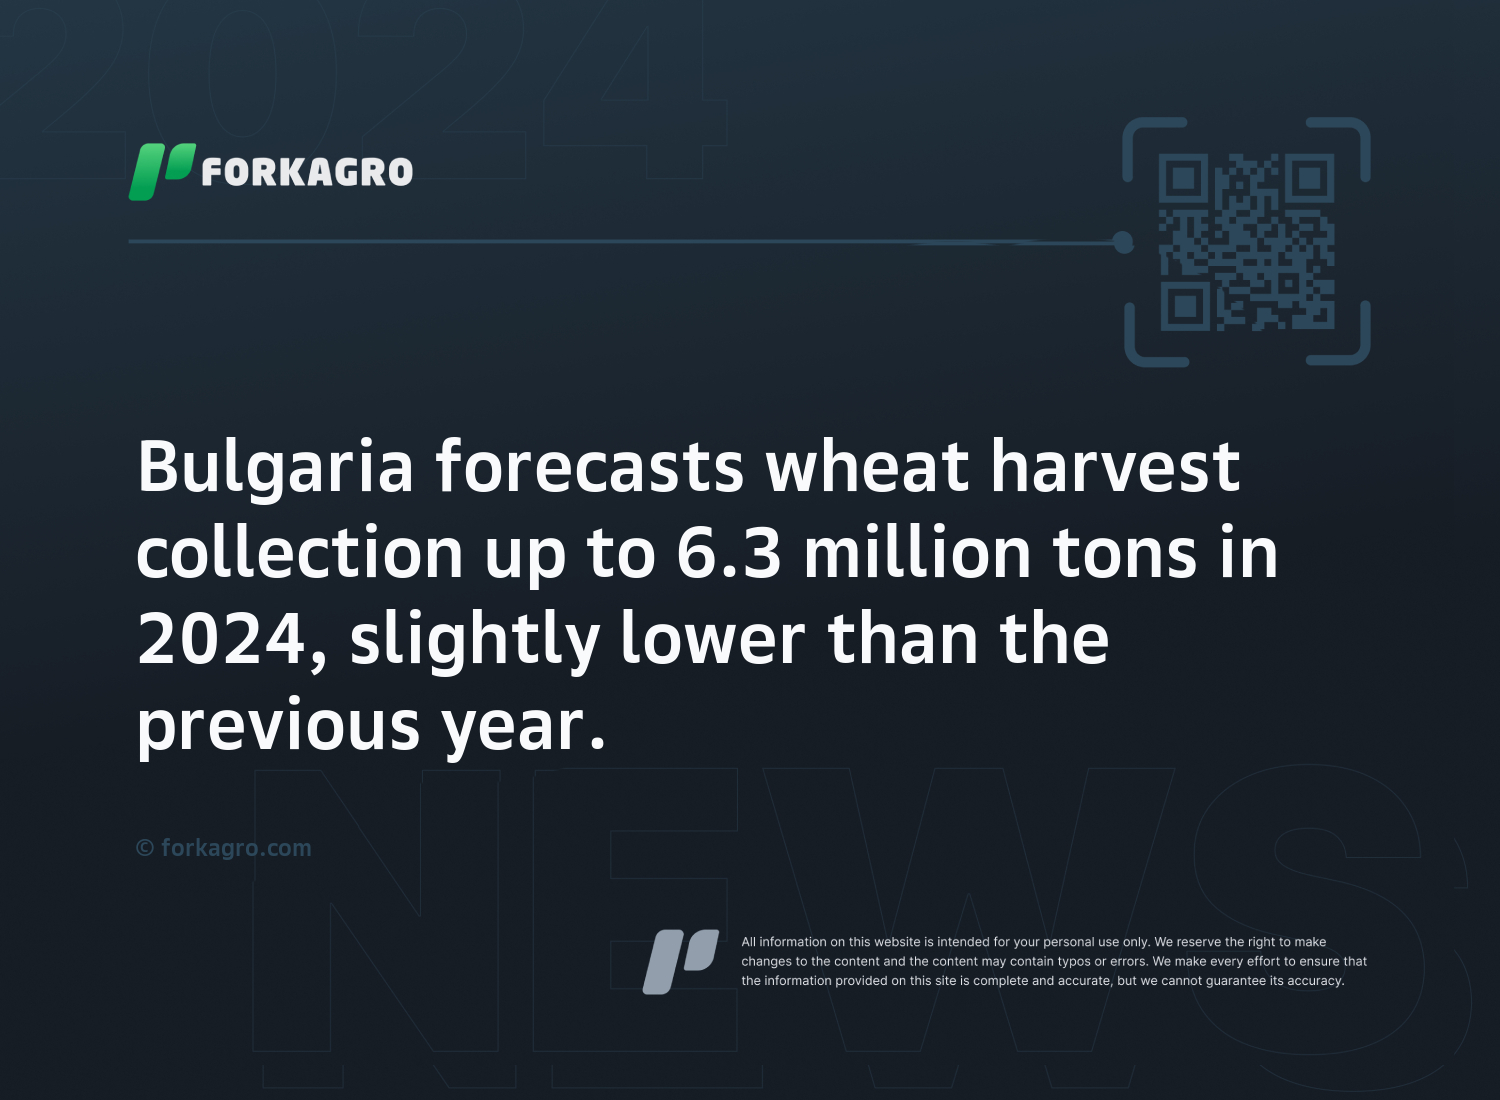 Bulgaria forecasts wheat harvest collection up to 6.3 million tons in 2024, slightly lower than the previous year.